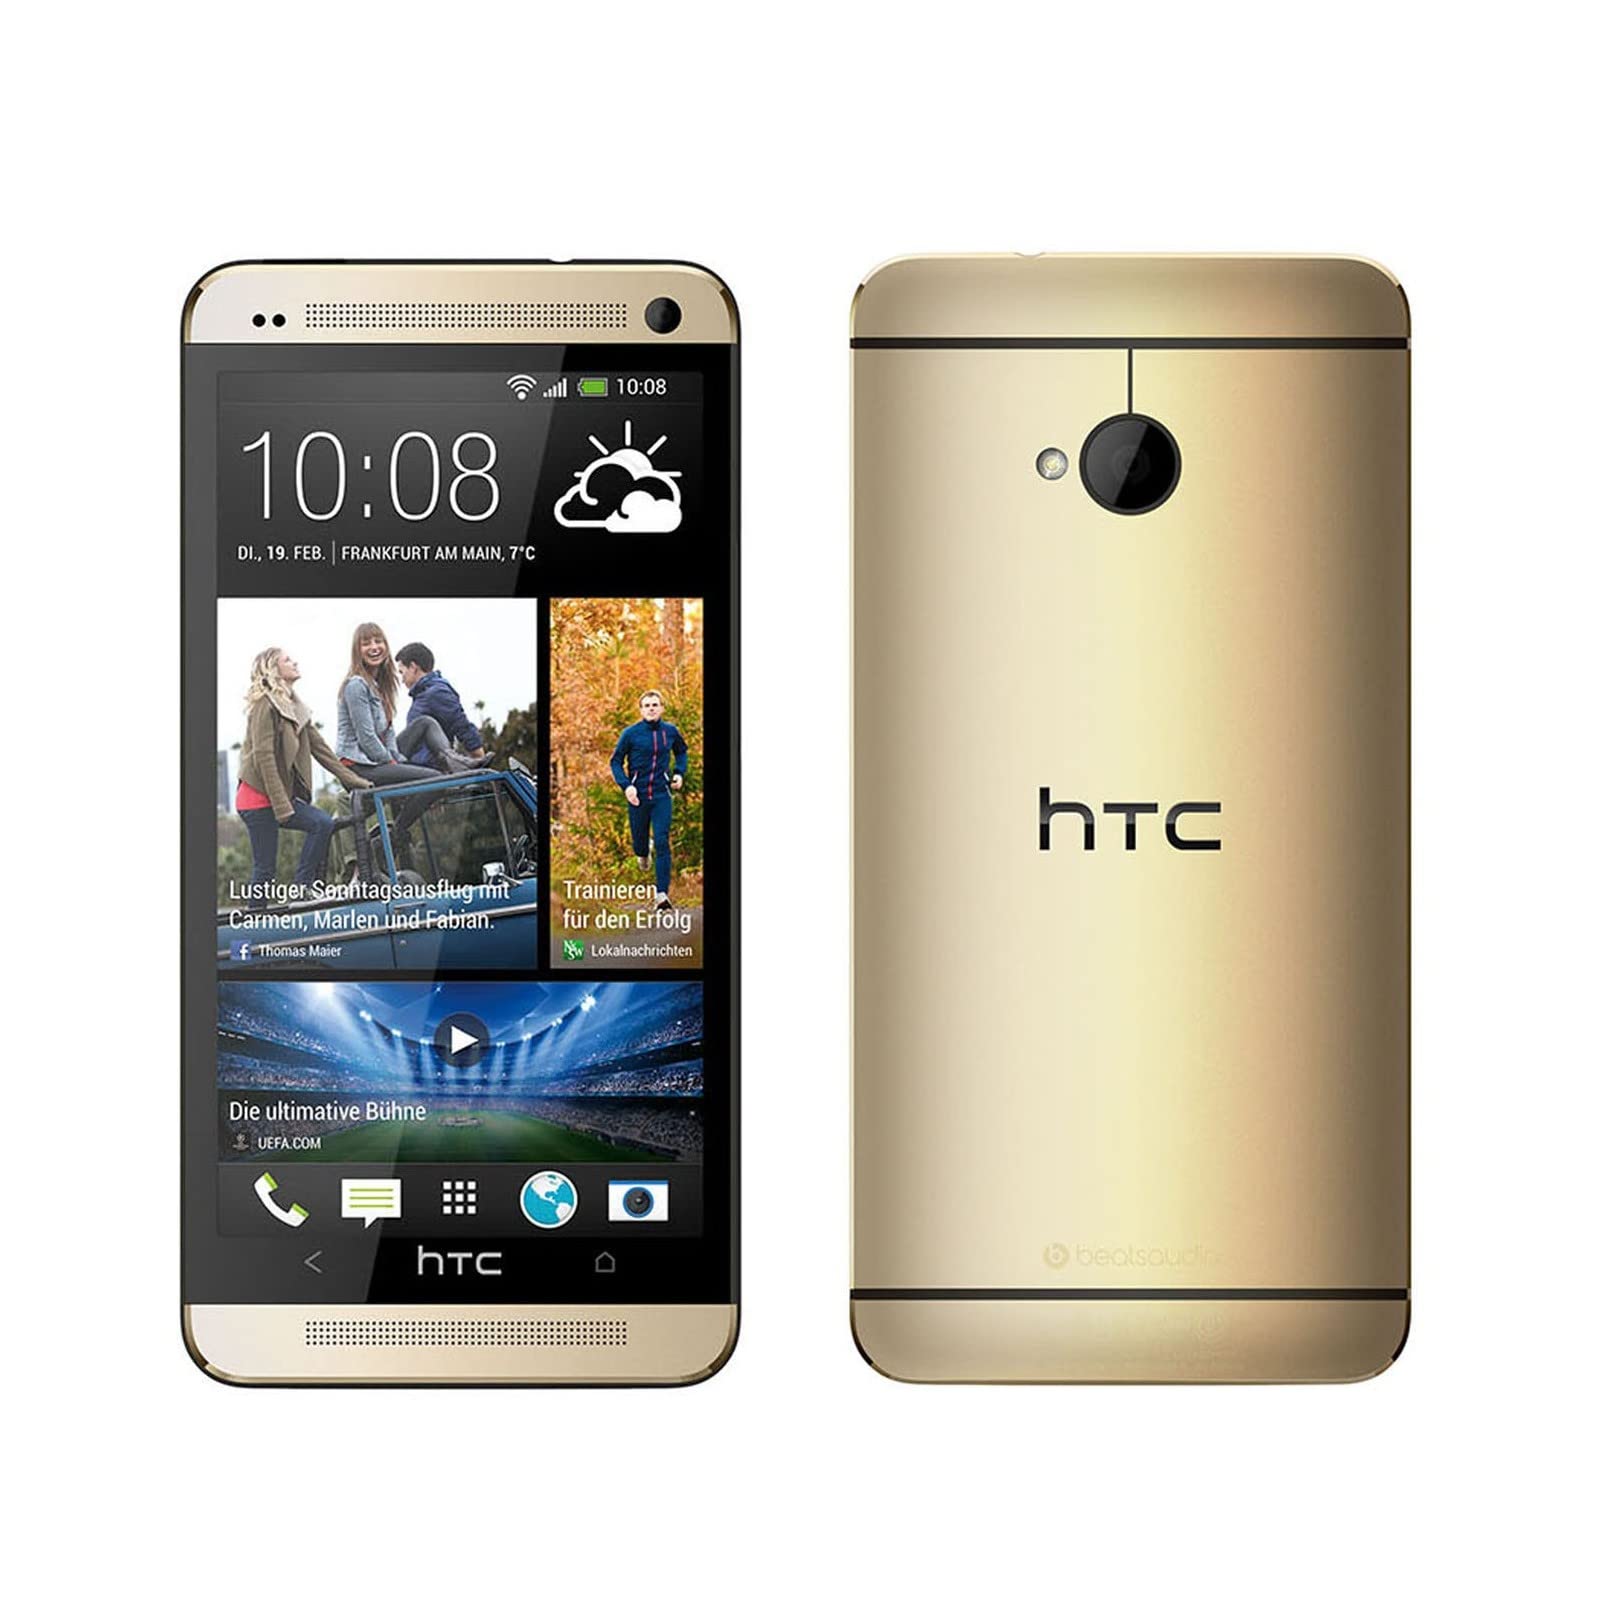 How To Activate Voice Recognition On HTC